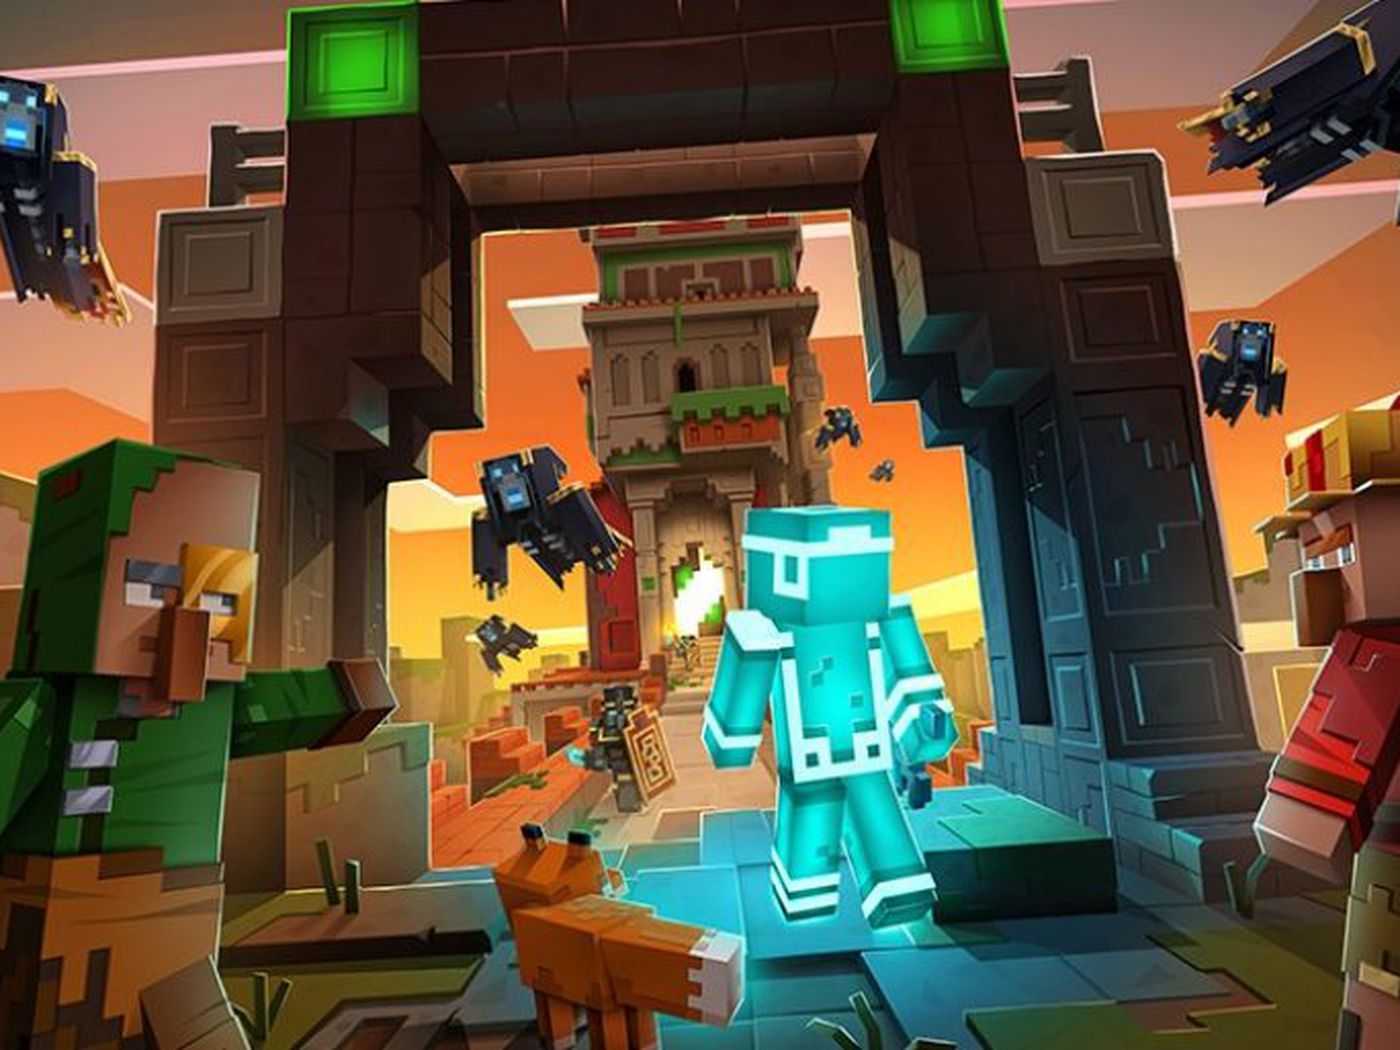 Minecraft's next update is soon, along with a season for Dungeons